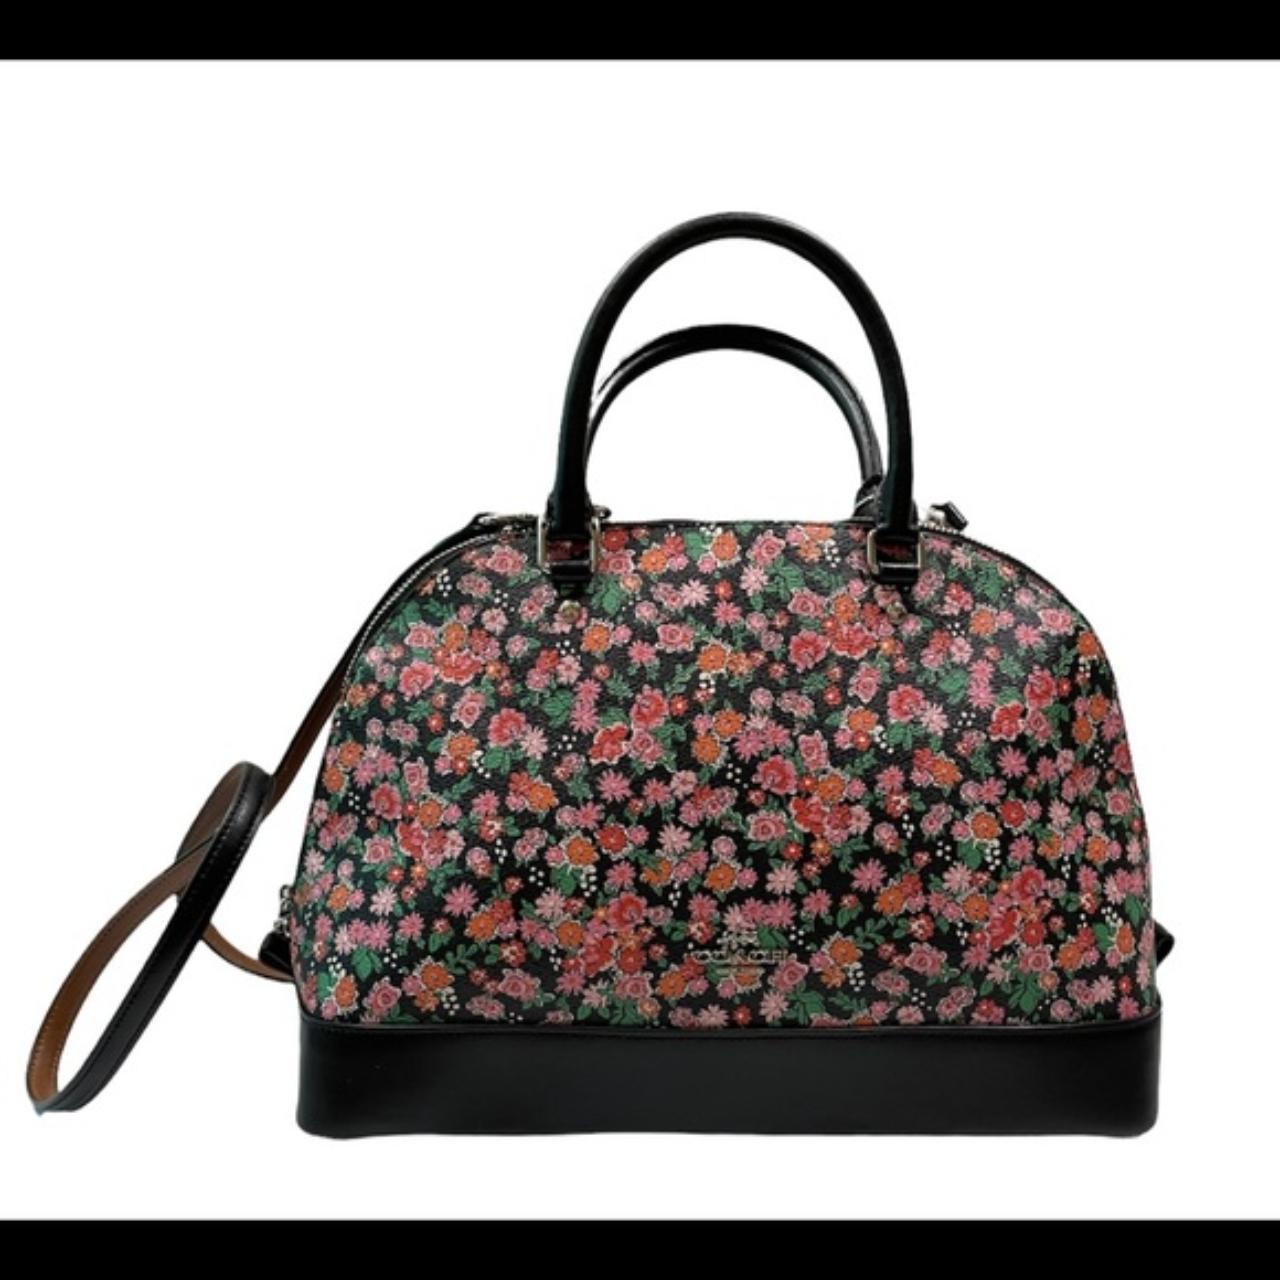 Coach Pink Coated Canvas and Leather Sierra Satchel Coach